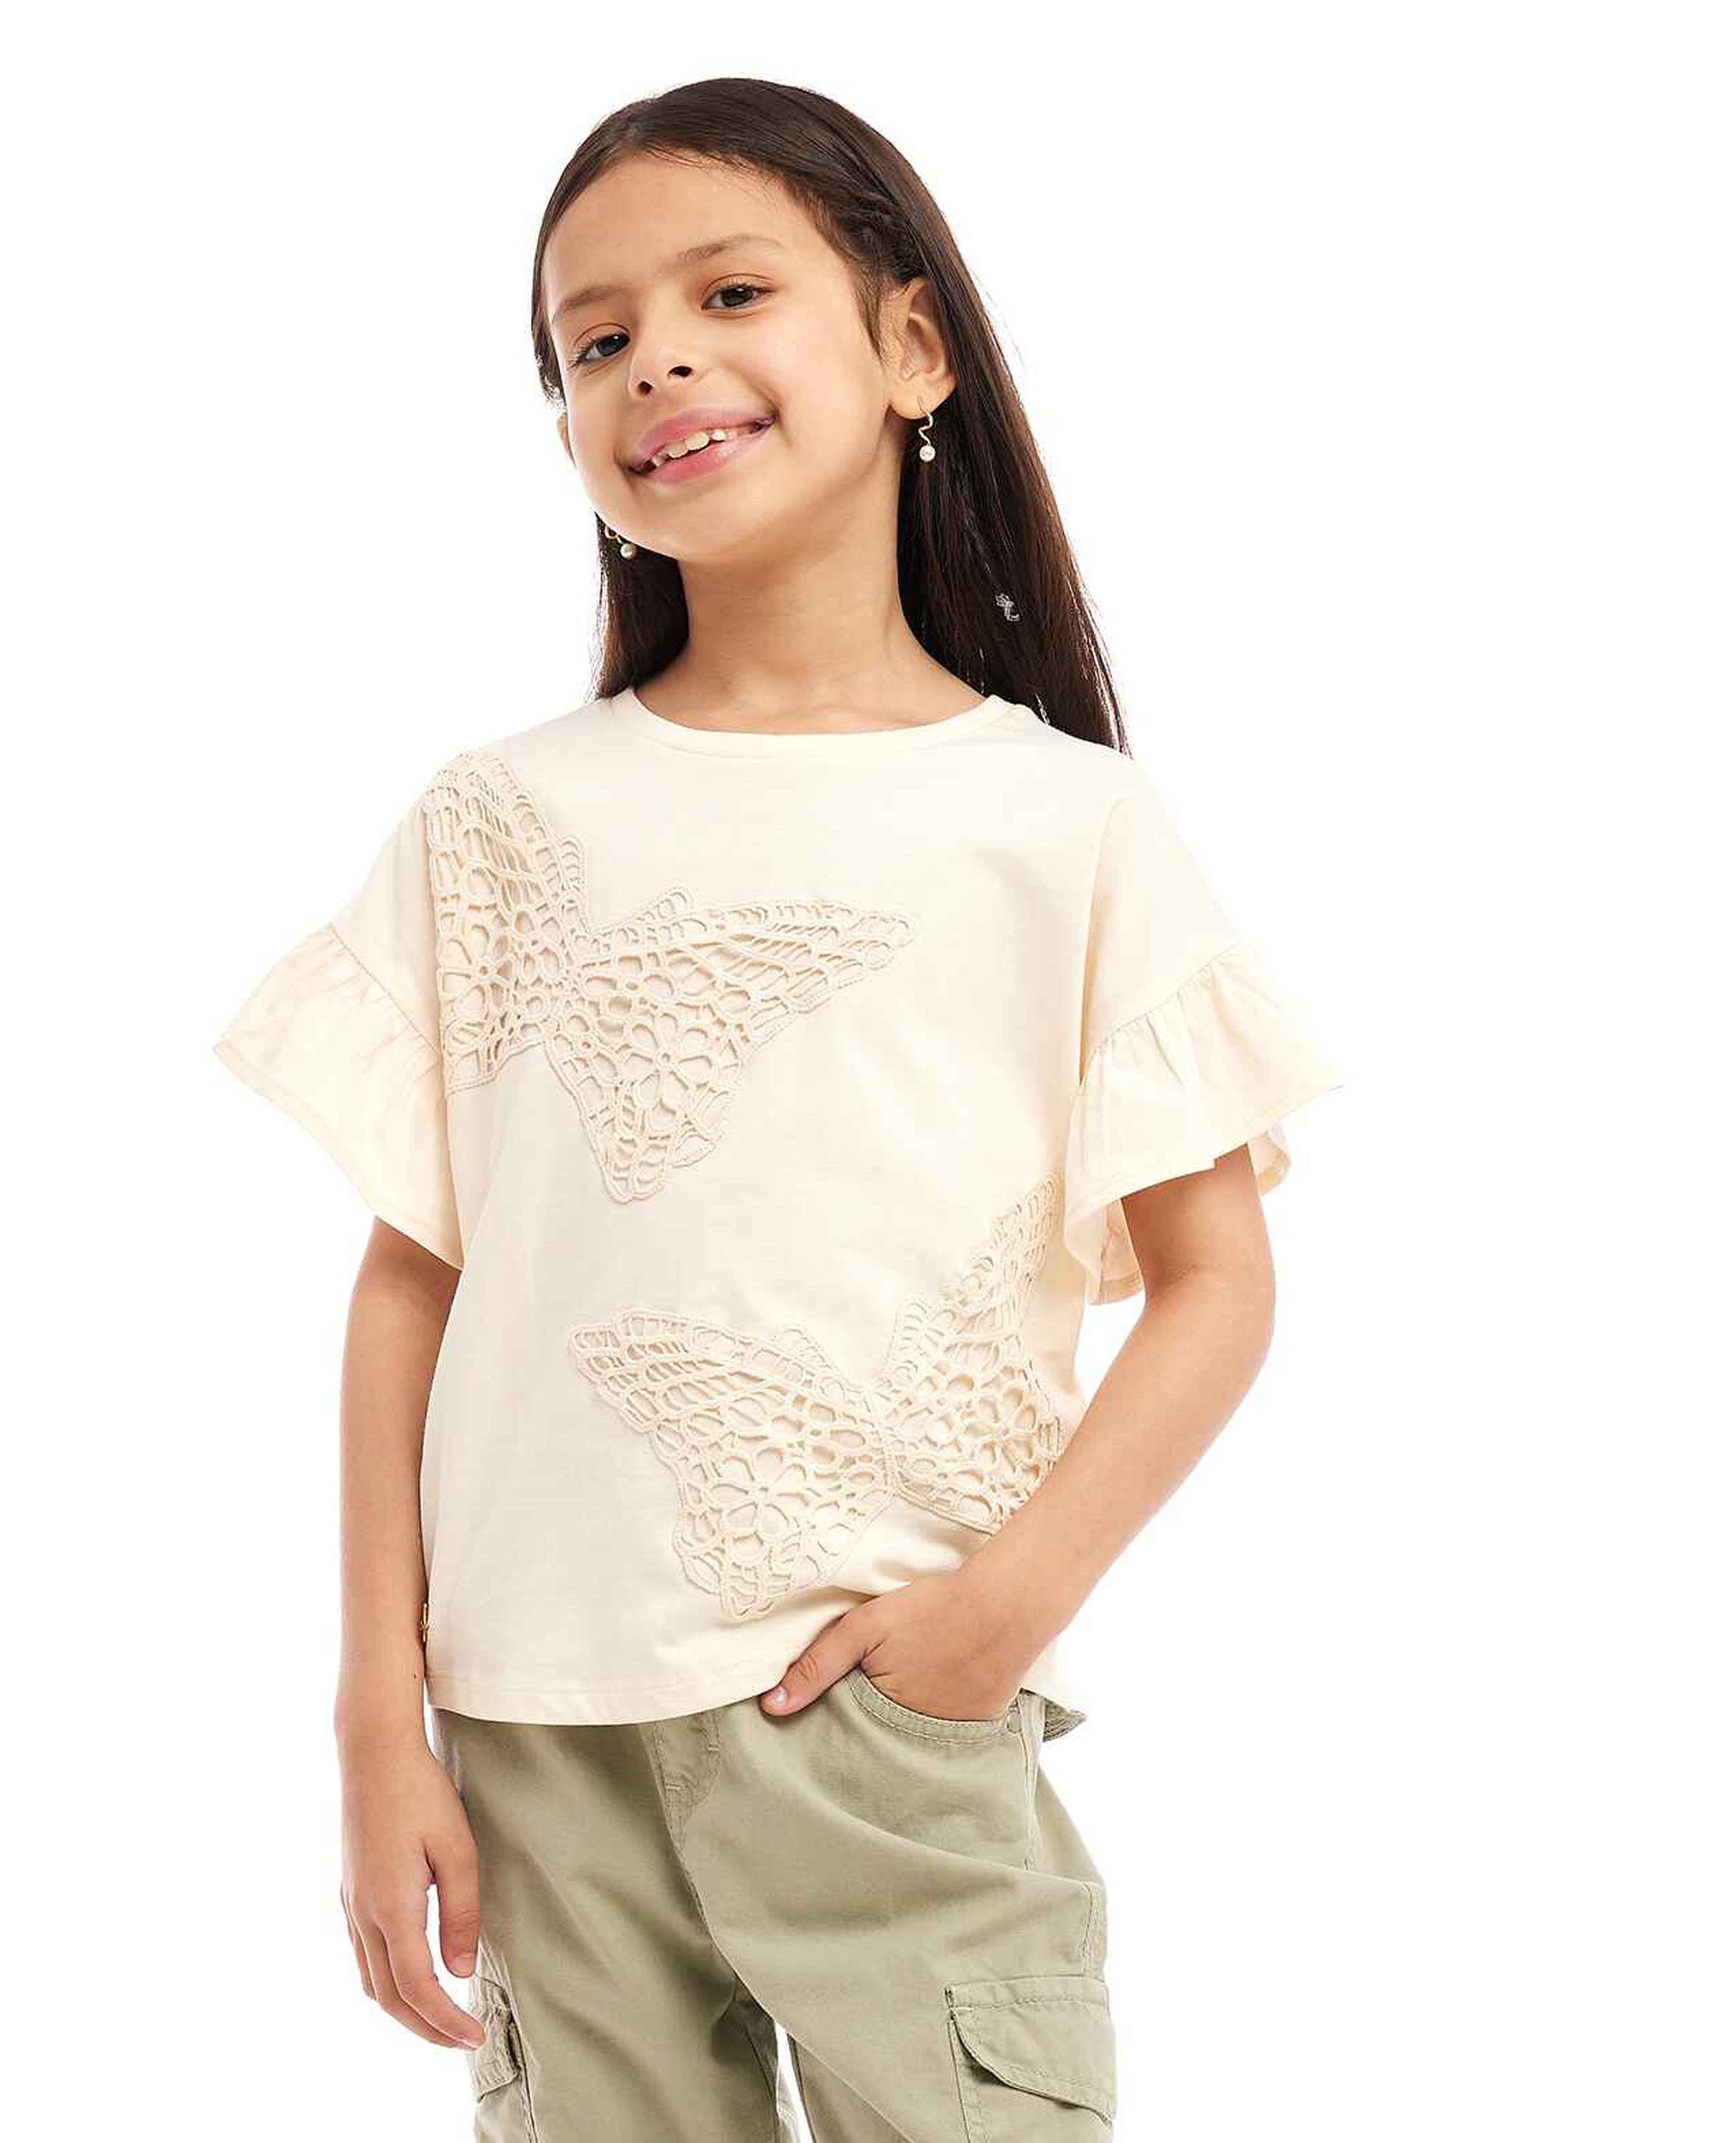 Cutwork Detail Top with Crew Neck and Short Sleeves